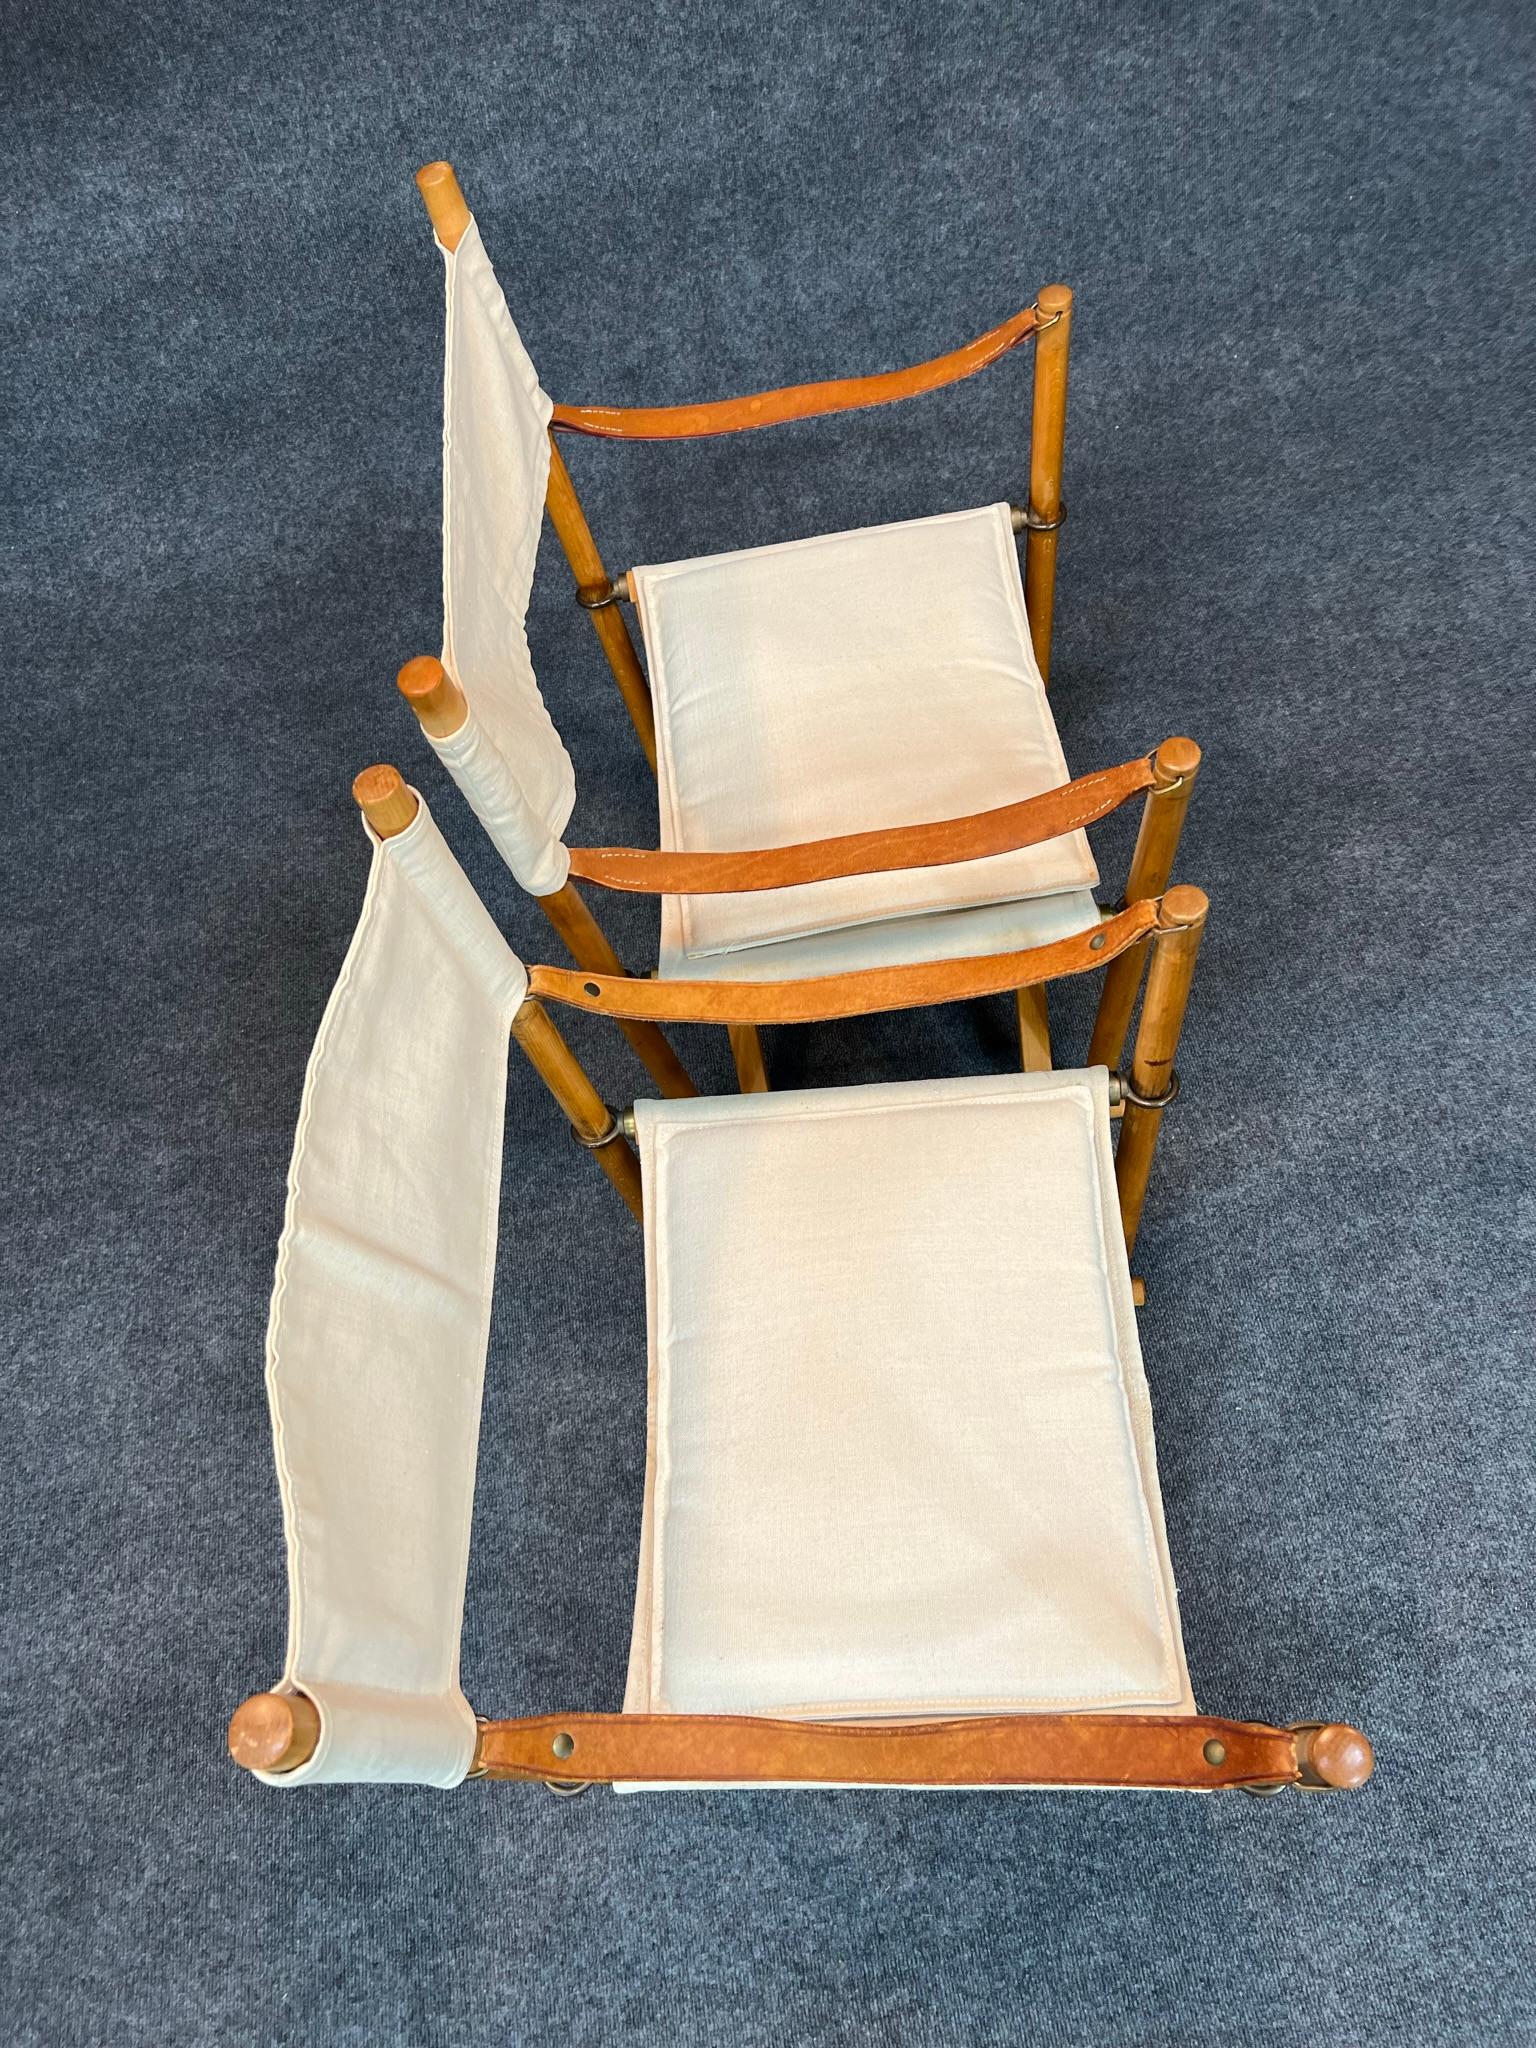 Pair of Danish Modern folding safari chairs (Model MK-16) designed by Mogens Koch in 1932, one manufactured by Rud. Rasmussen and the other by Cado. Made in natural beech wood and brass. Back, seat and cushions in light canvas. Armrests in full